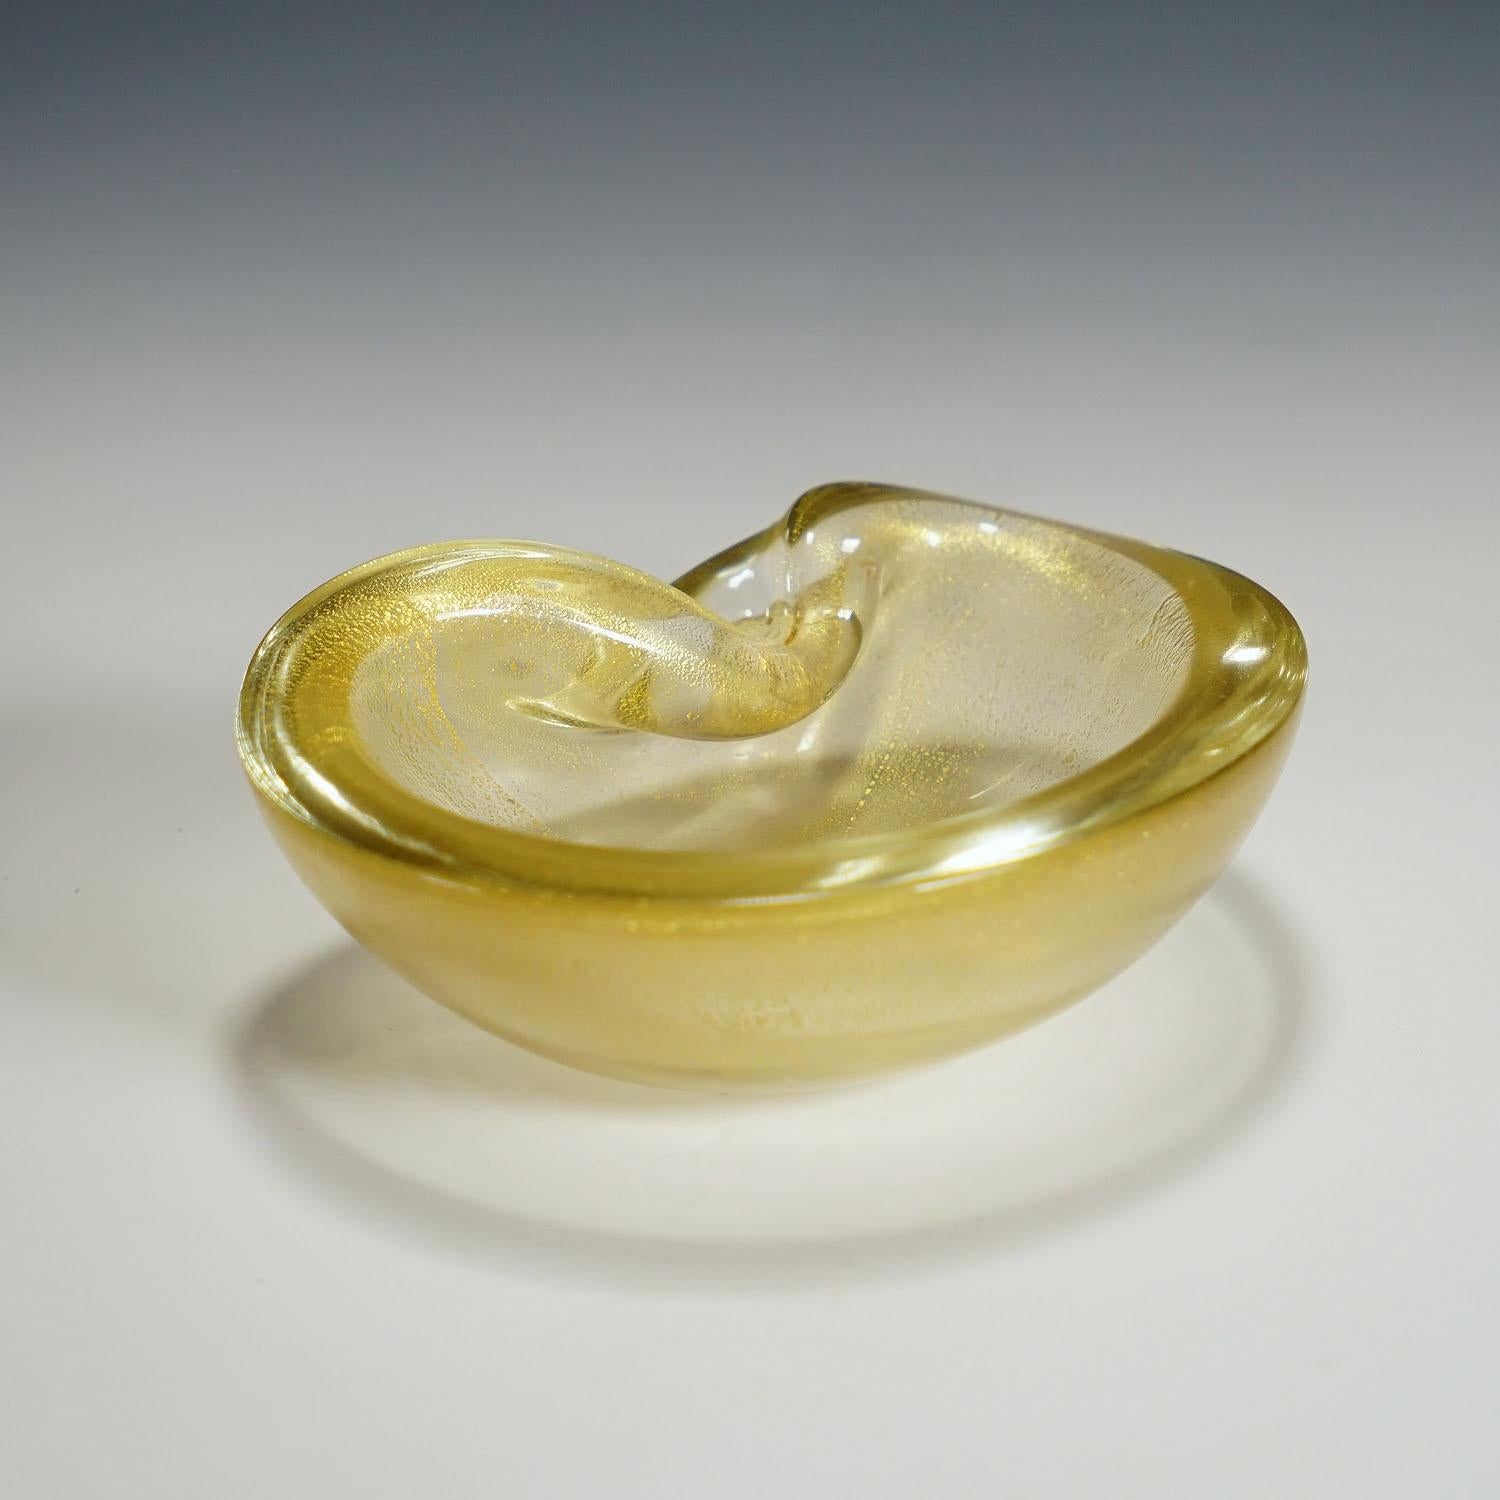 Vintage Art Glass Bowl with Gold Foil, Murano, Italy, 1950s

A vintage Venetian art glass bowl most probably designed by Archimede Seguso for Vetreria Artistica Archimede Seguso in the 1950s. Thick clear glass internally decorated with gold foil. An